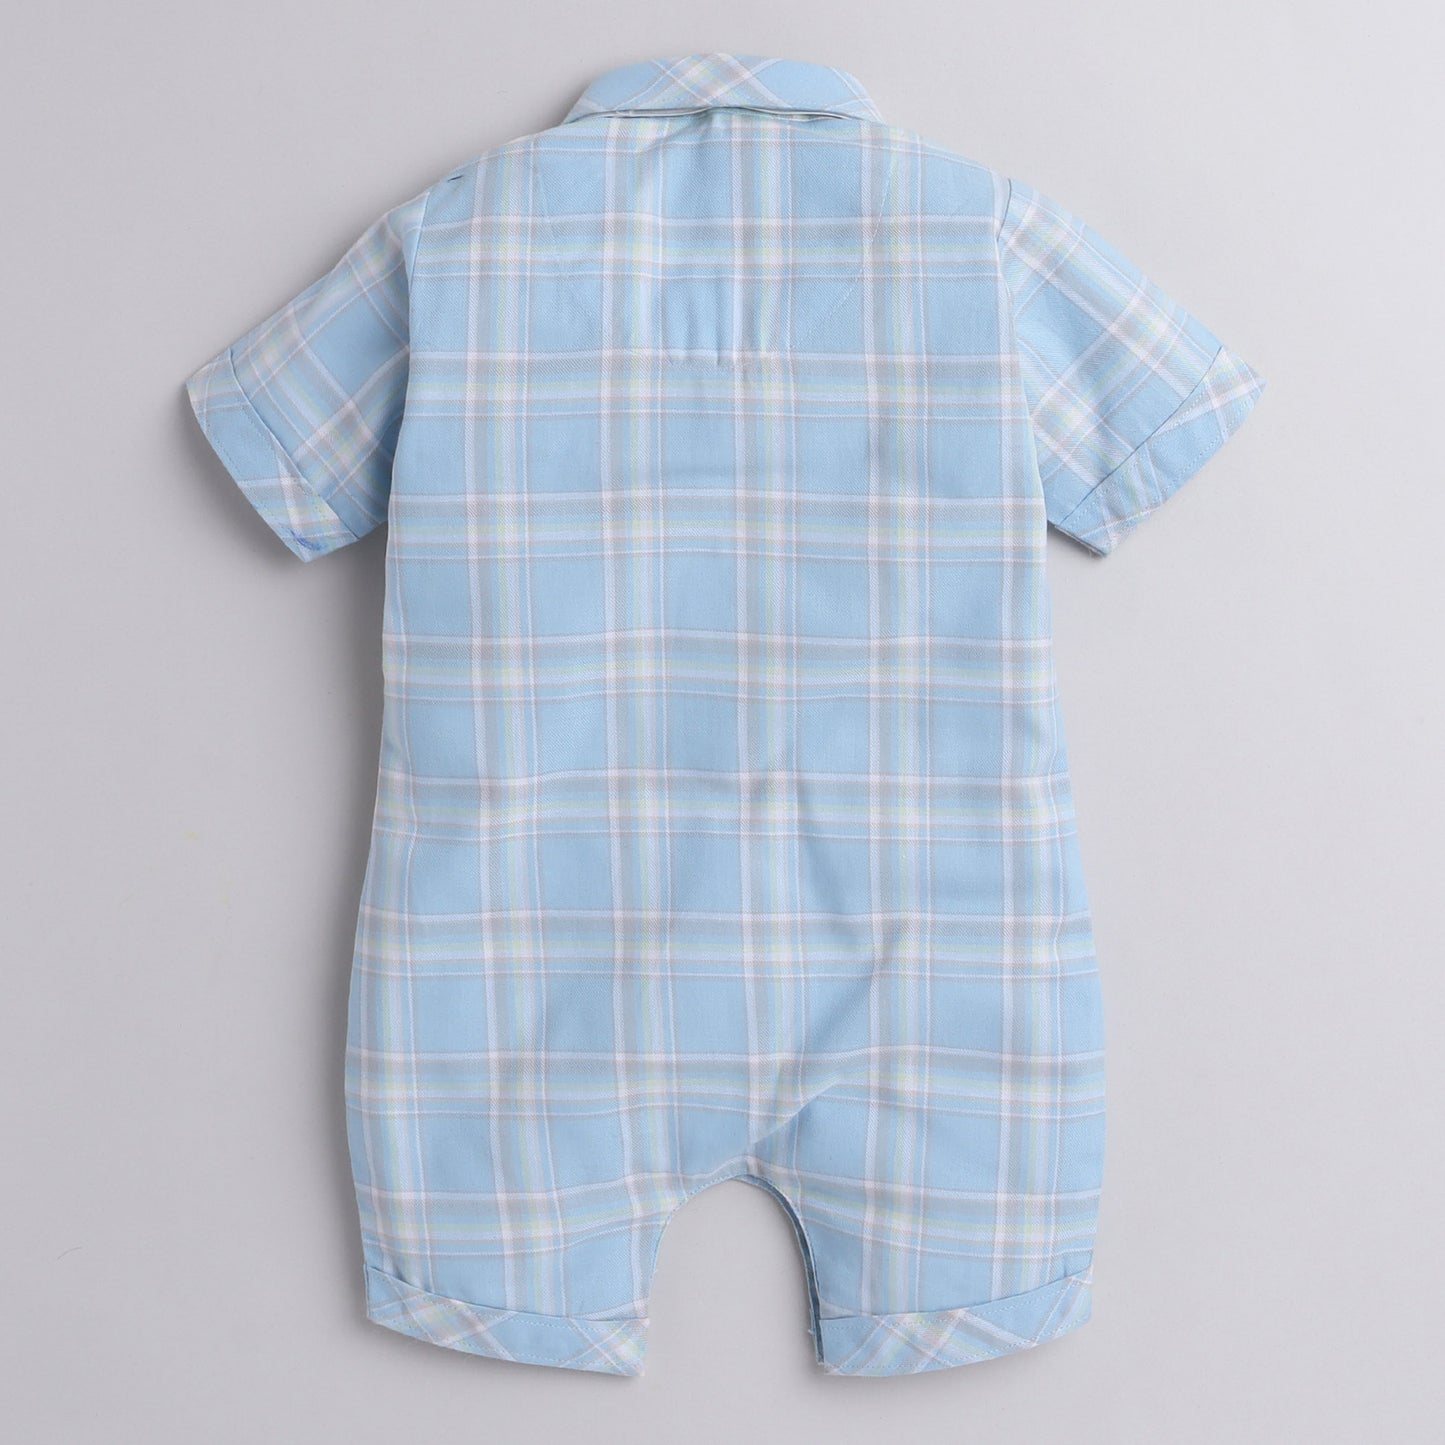 Polka Tots Cotton Half Sleeve Checks Party Wear Shirt Romper With Dual Bow - Sky Blue